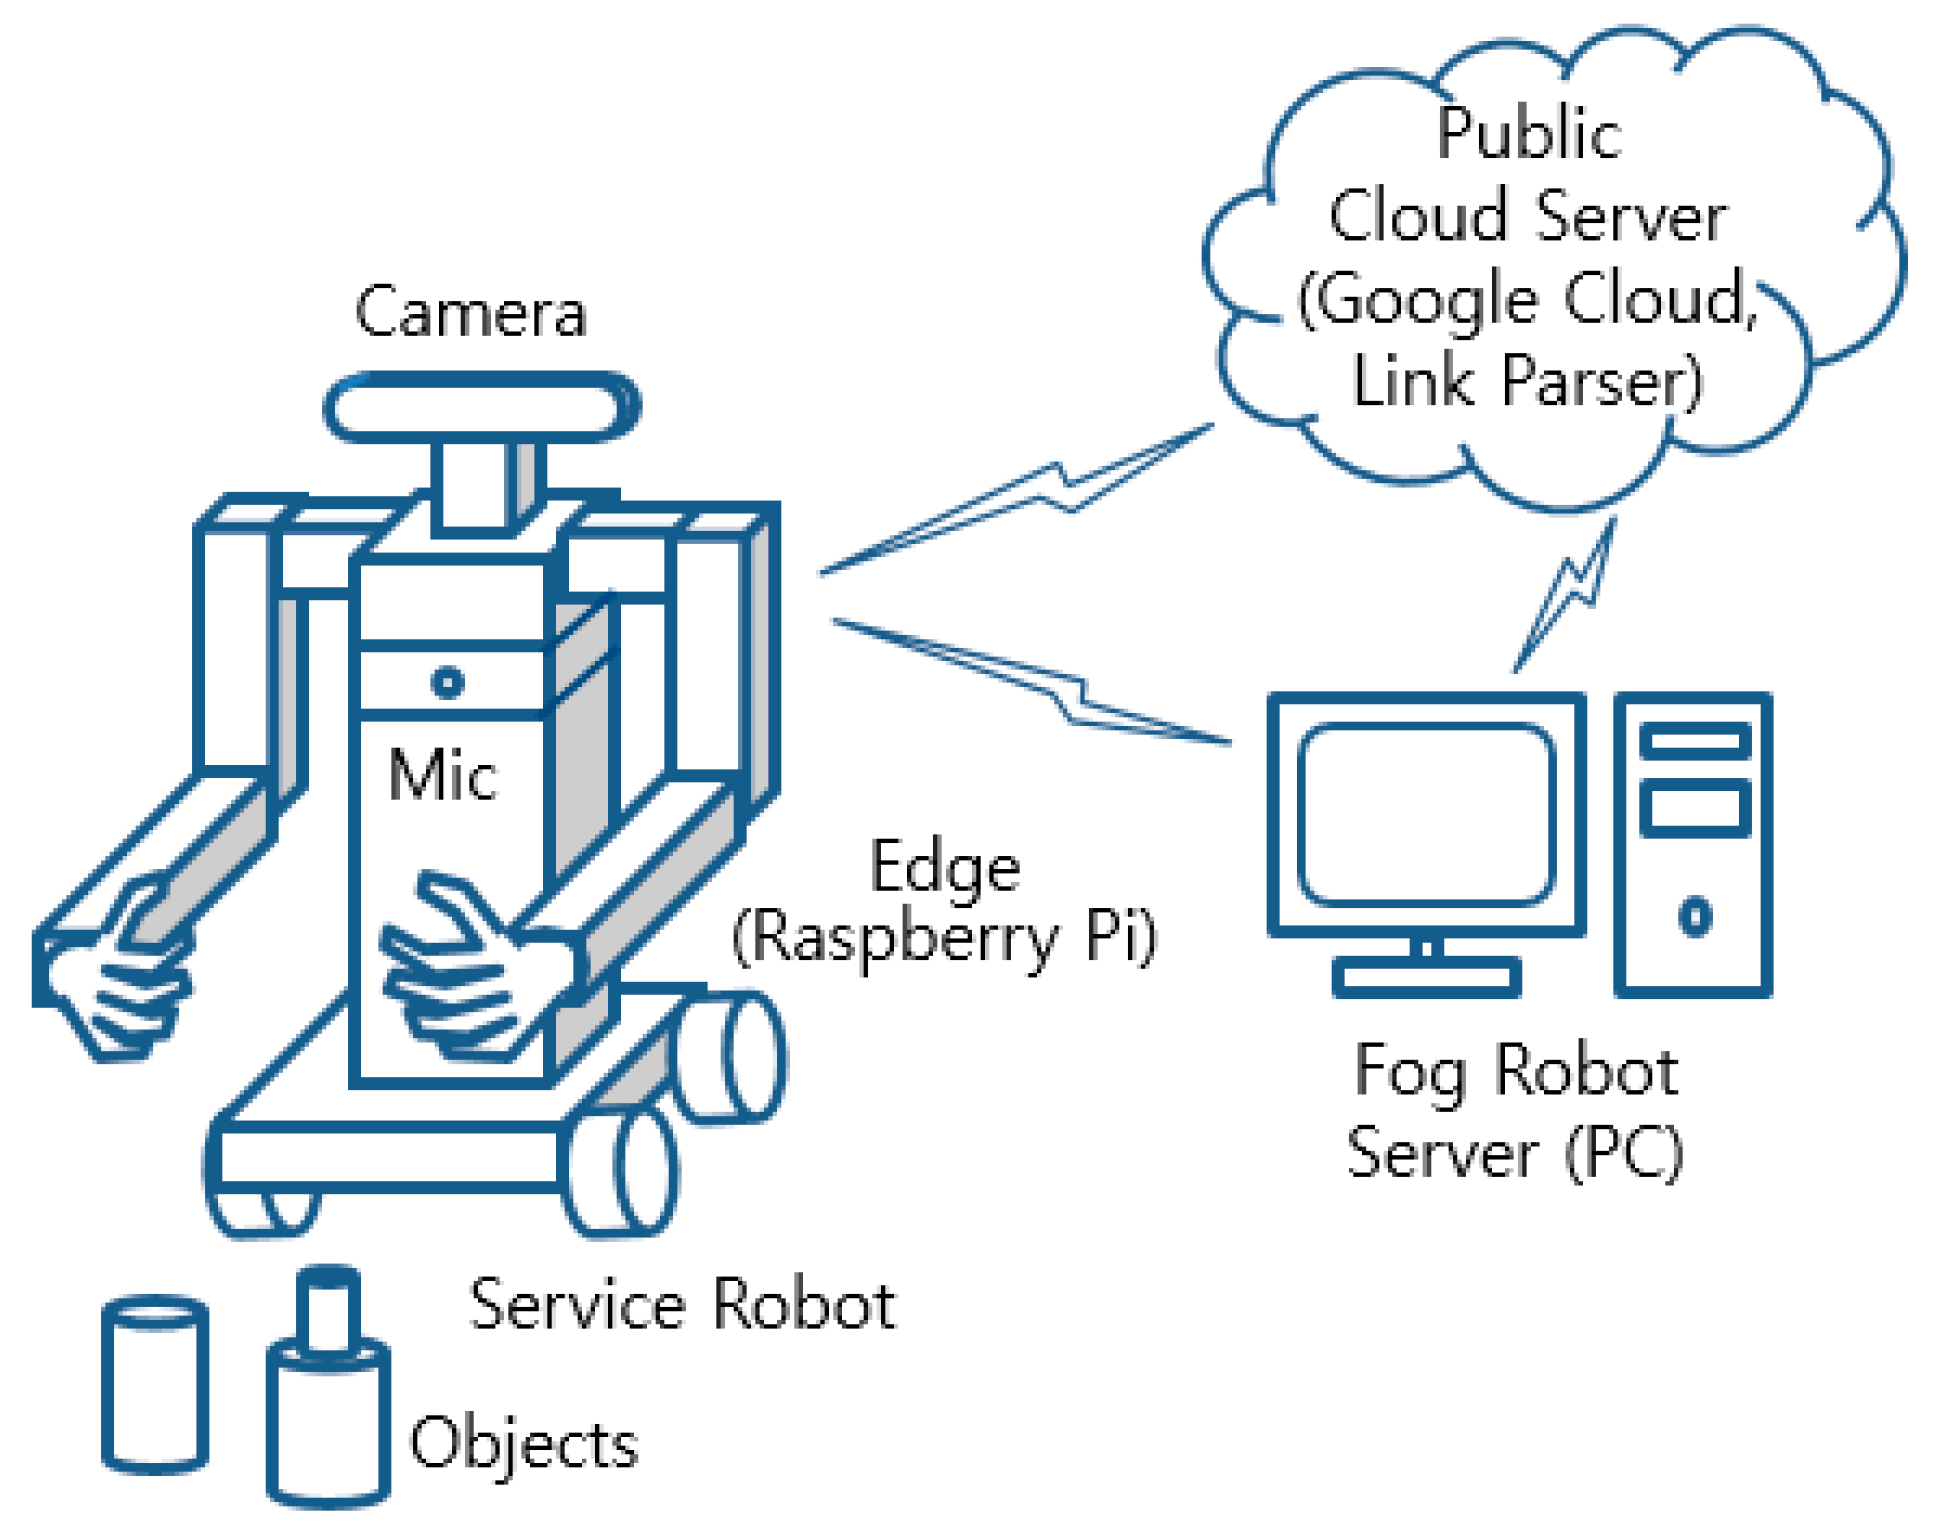 Applied Sciences | Free Full-Text | A Function as a Service Based Fog  Robotic System for Cognitive Robots | HTML